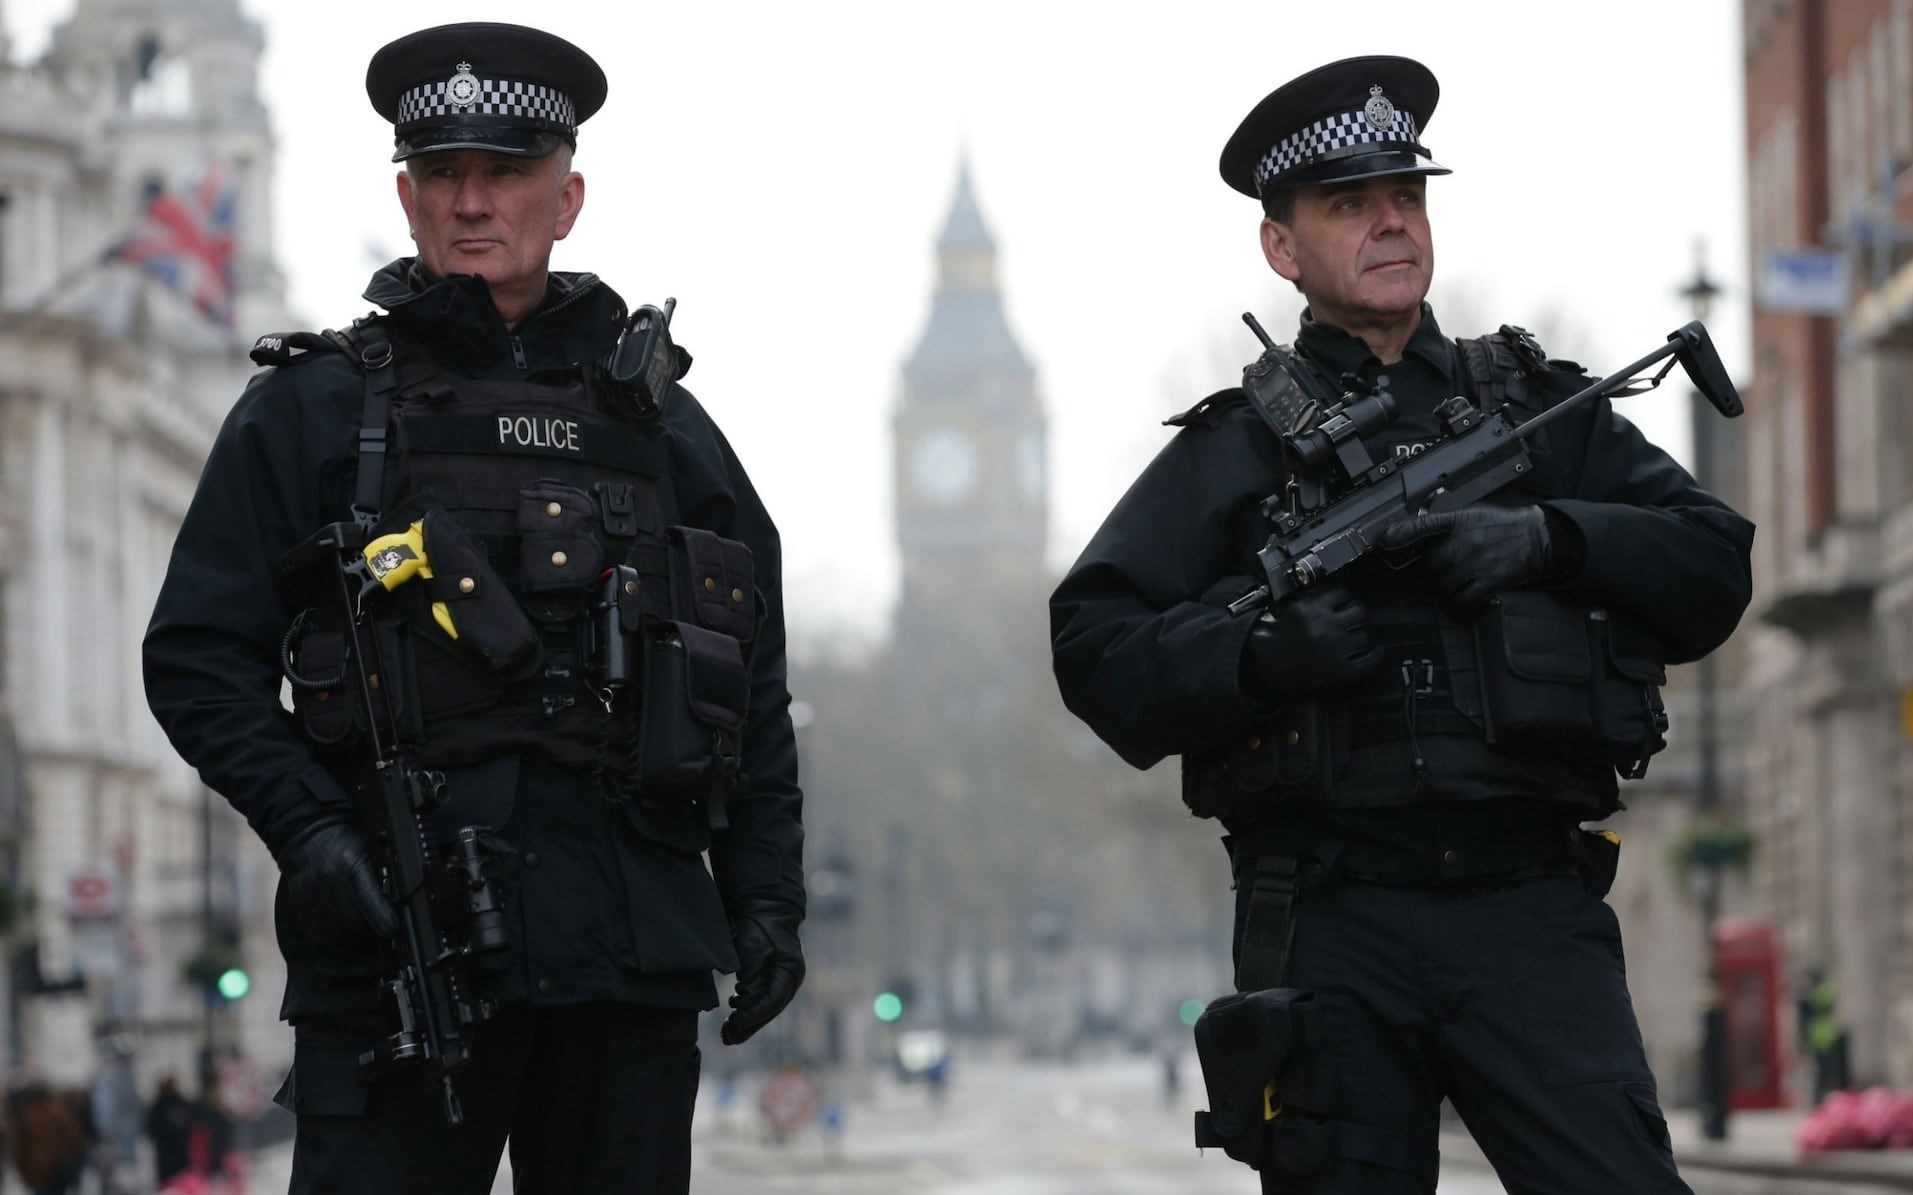 More Police on London Streets as Murder Spike Worries Locals